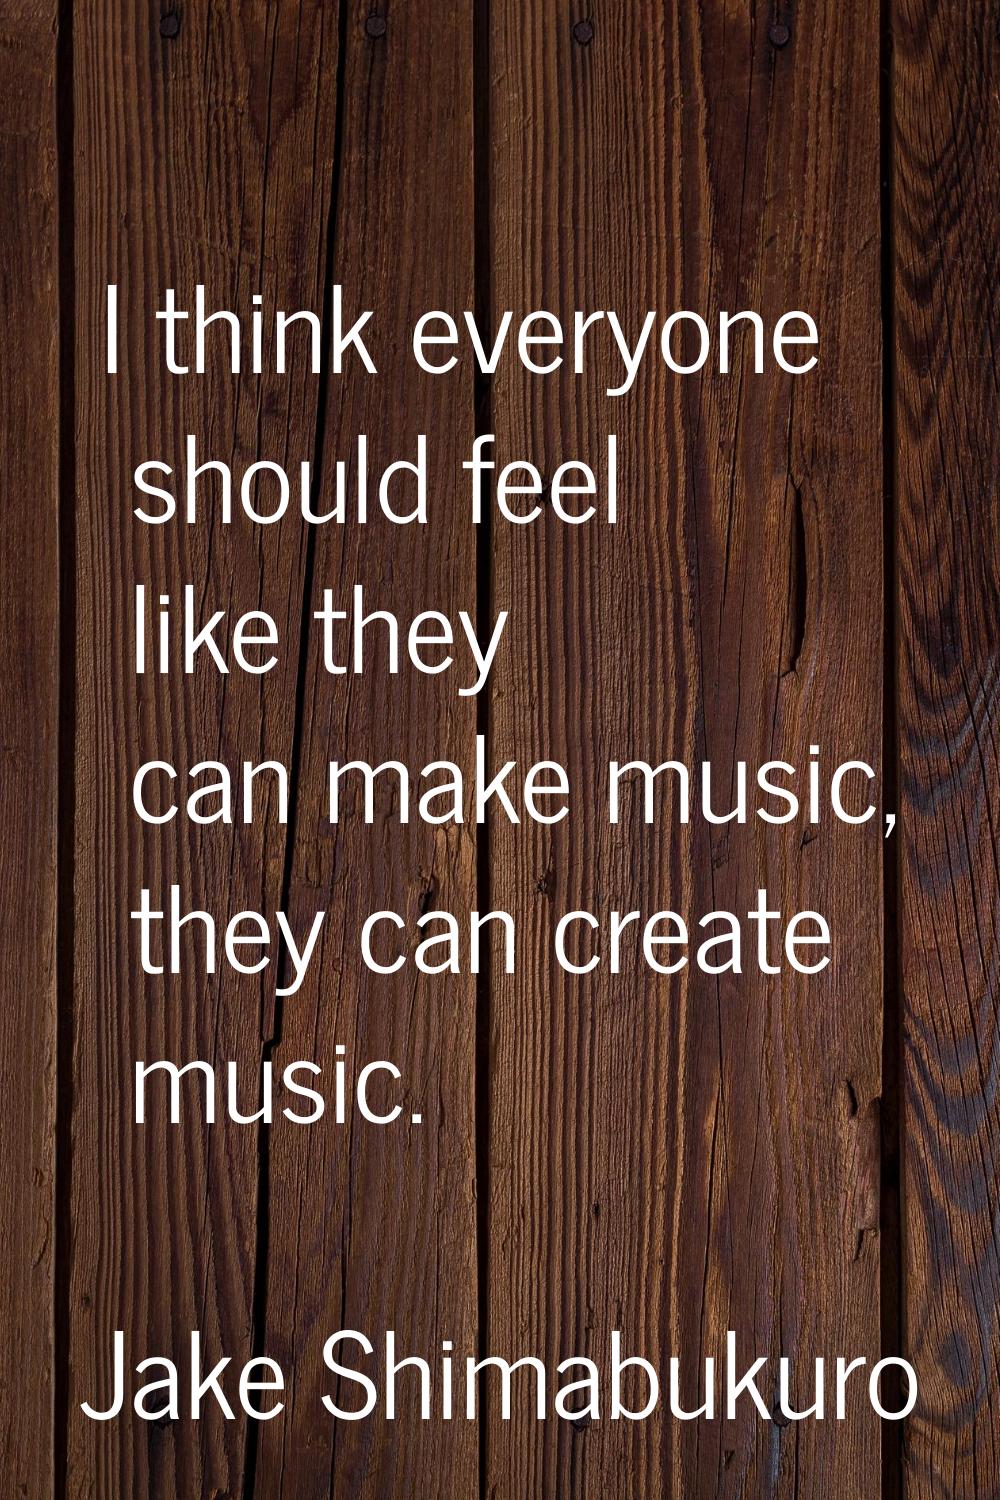 I think everyone should feel like they can make music, they can create music.